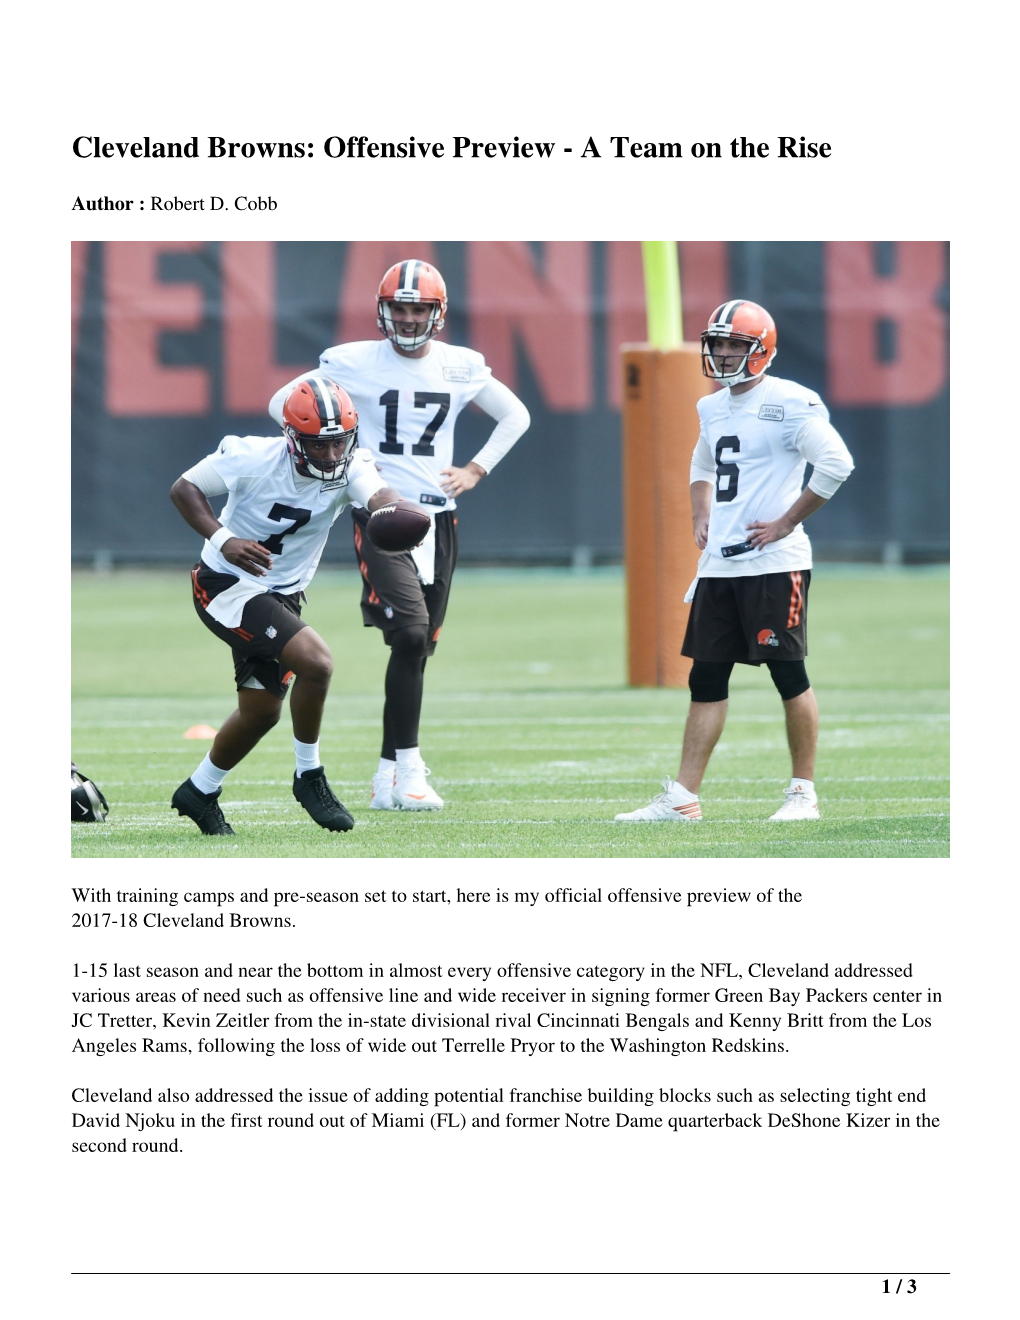 Cleveland Browns: Offensive Preview - a Team on the Rise